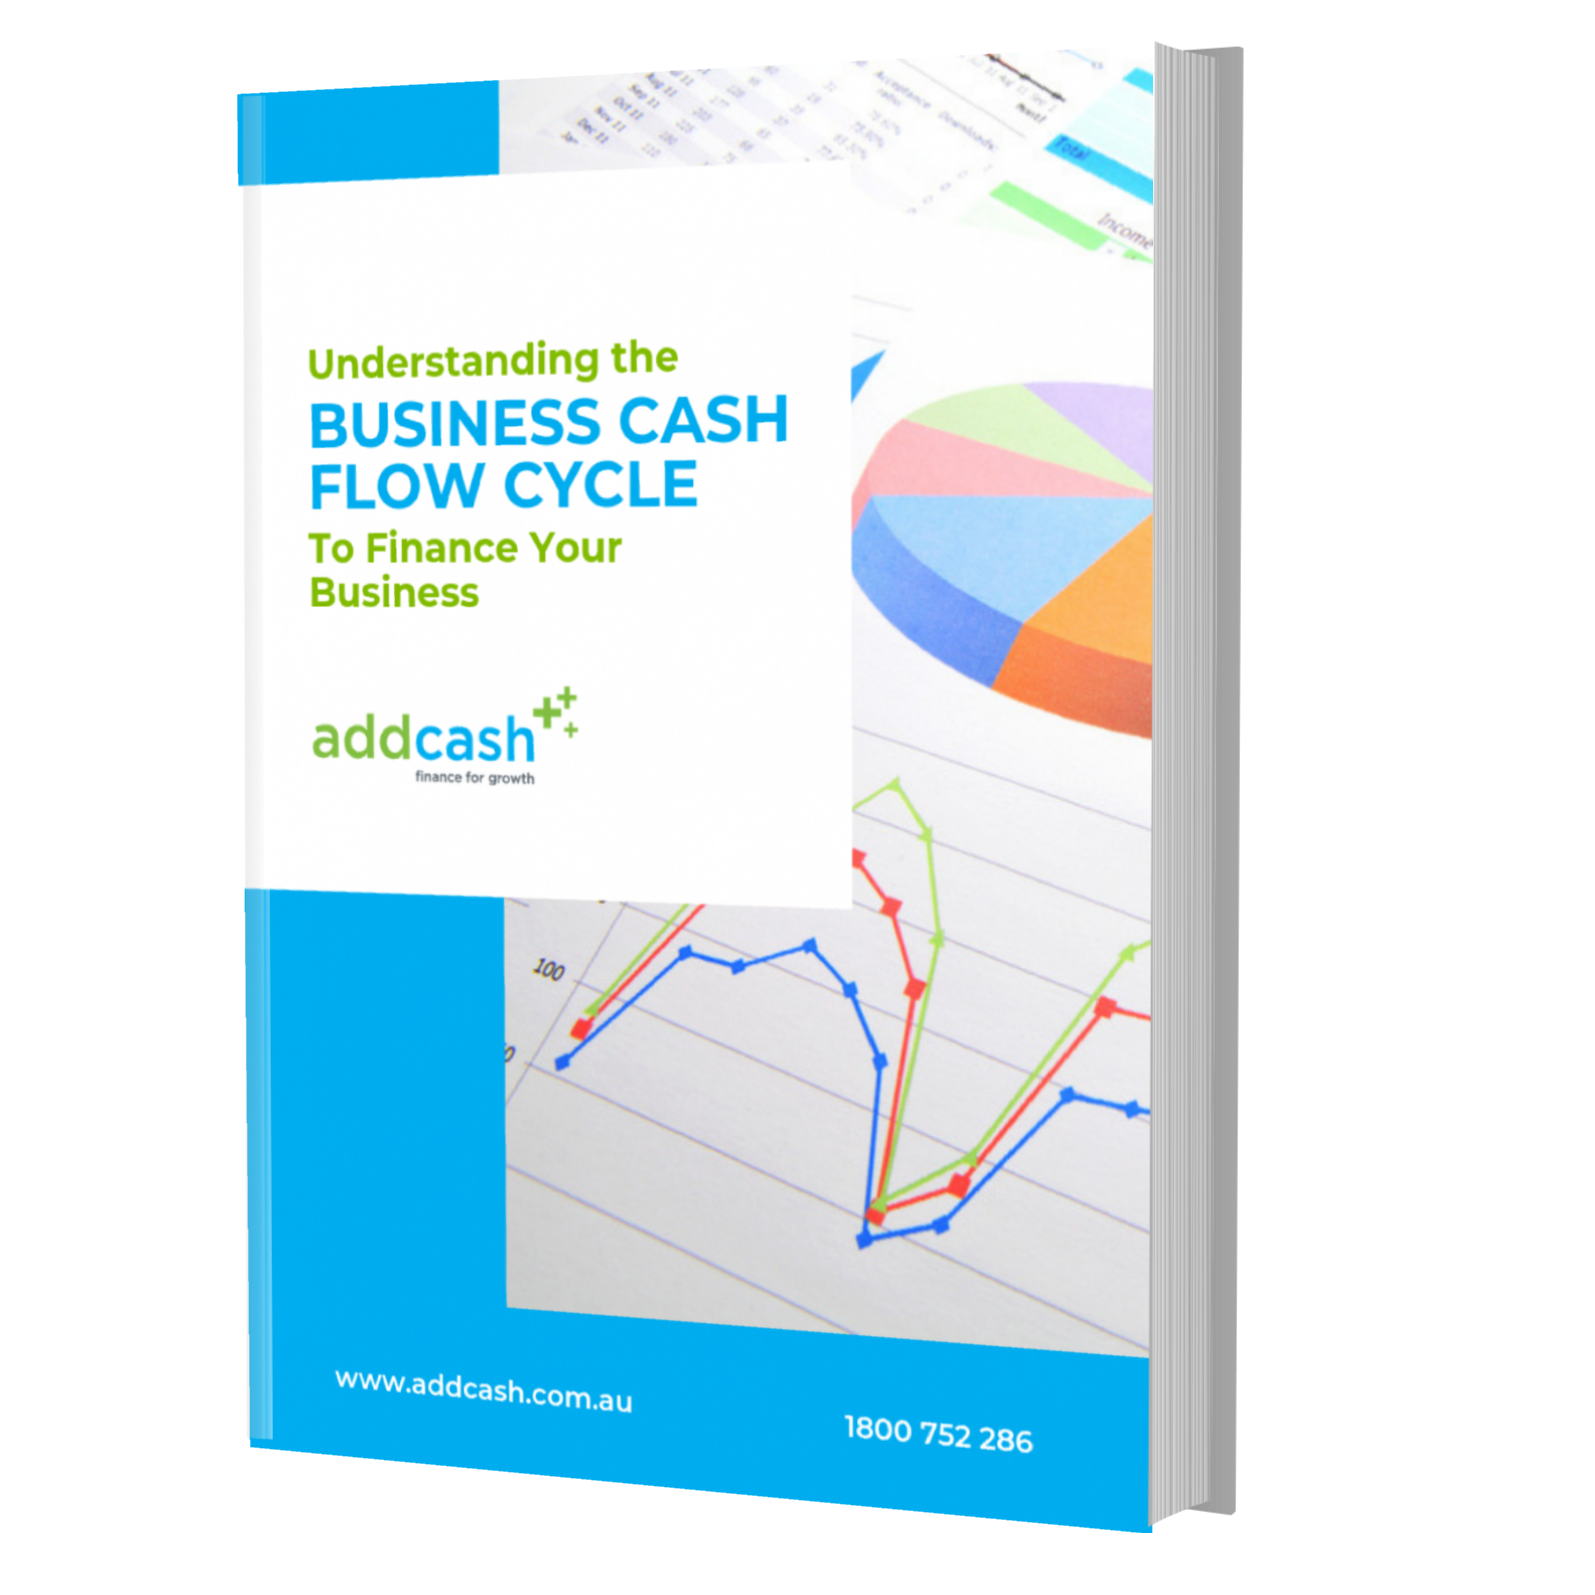 Understand the Business Cashflow Cycle eBook CTA